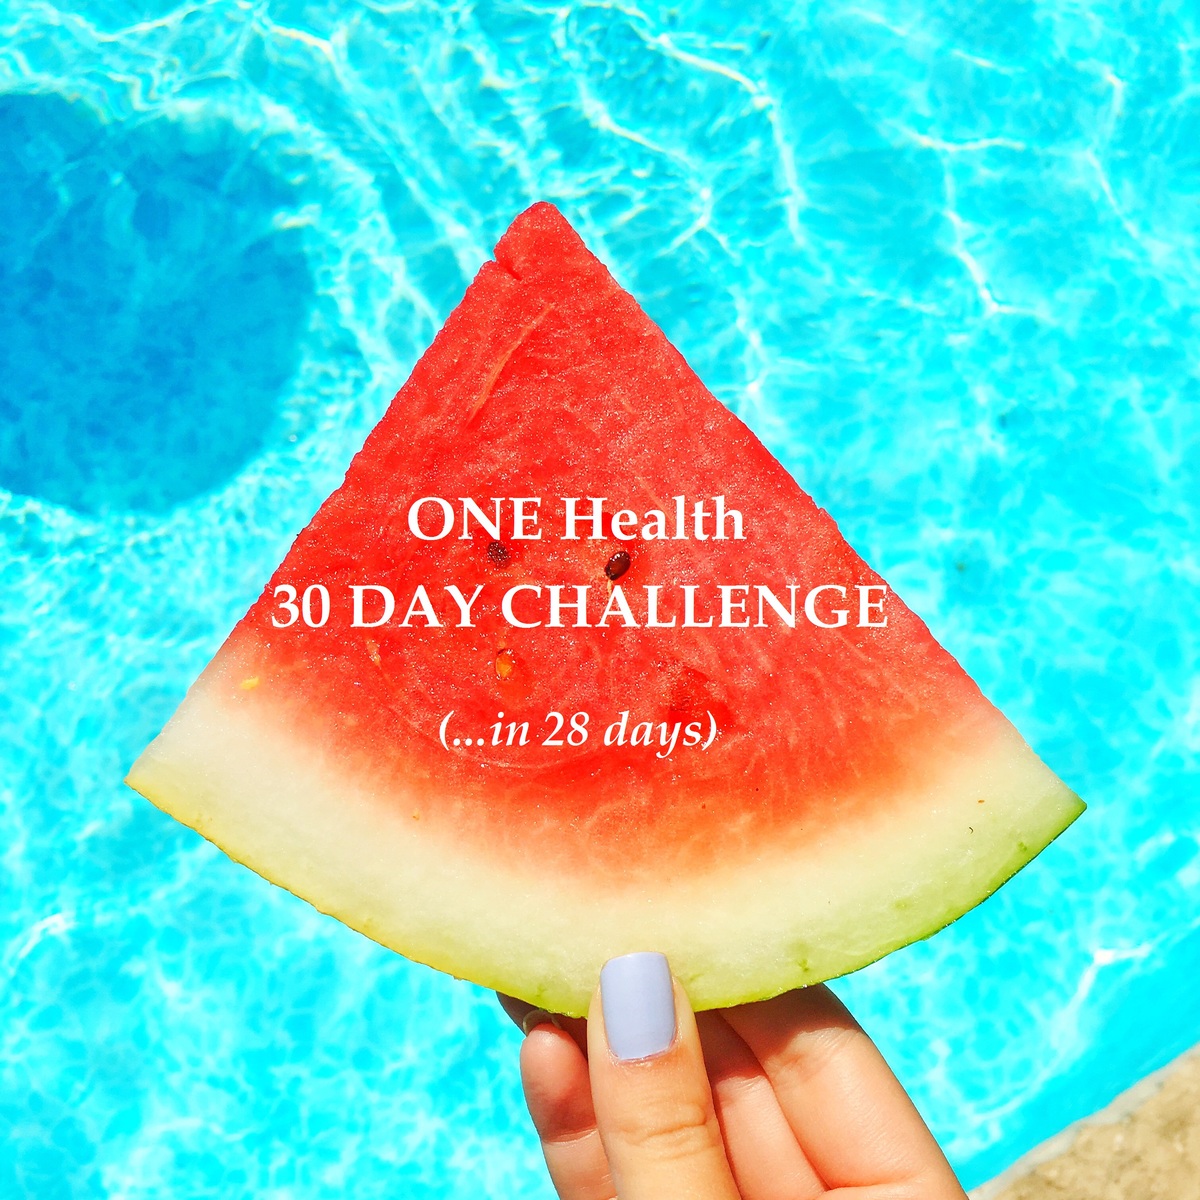 ONE Health 30 Day Challenge January 23, 2017 One Health Services Etobicoke